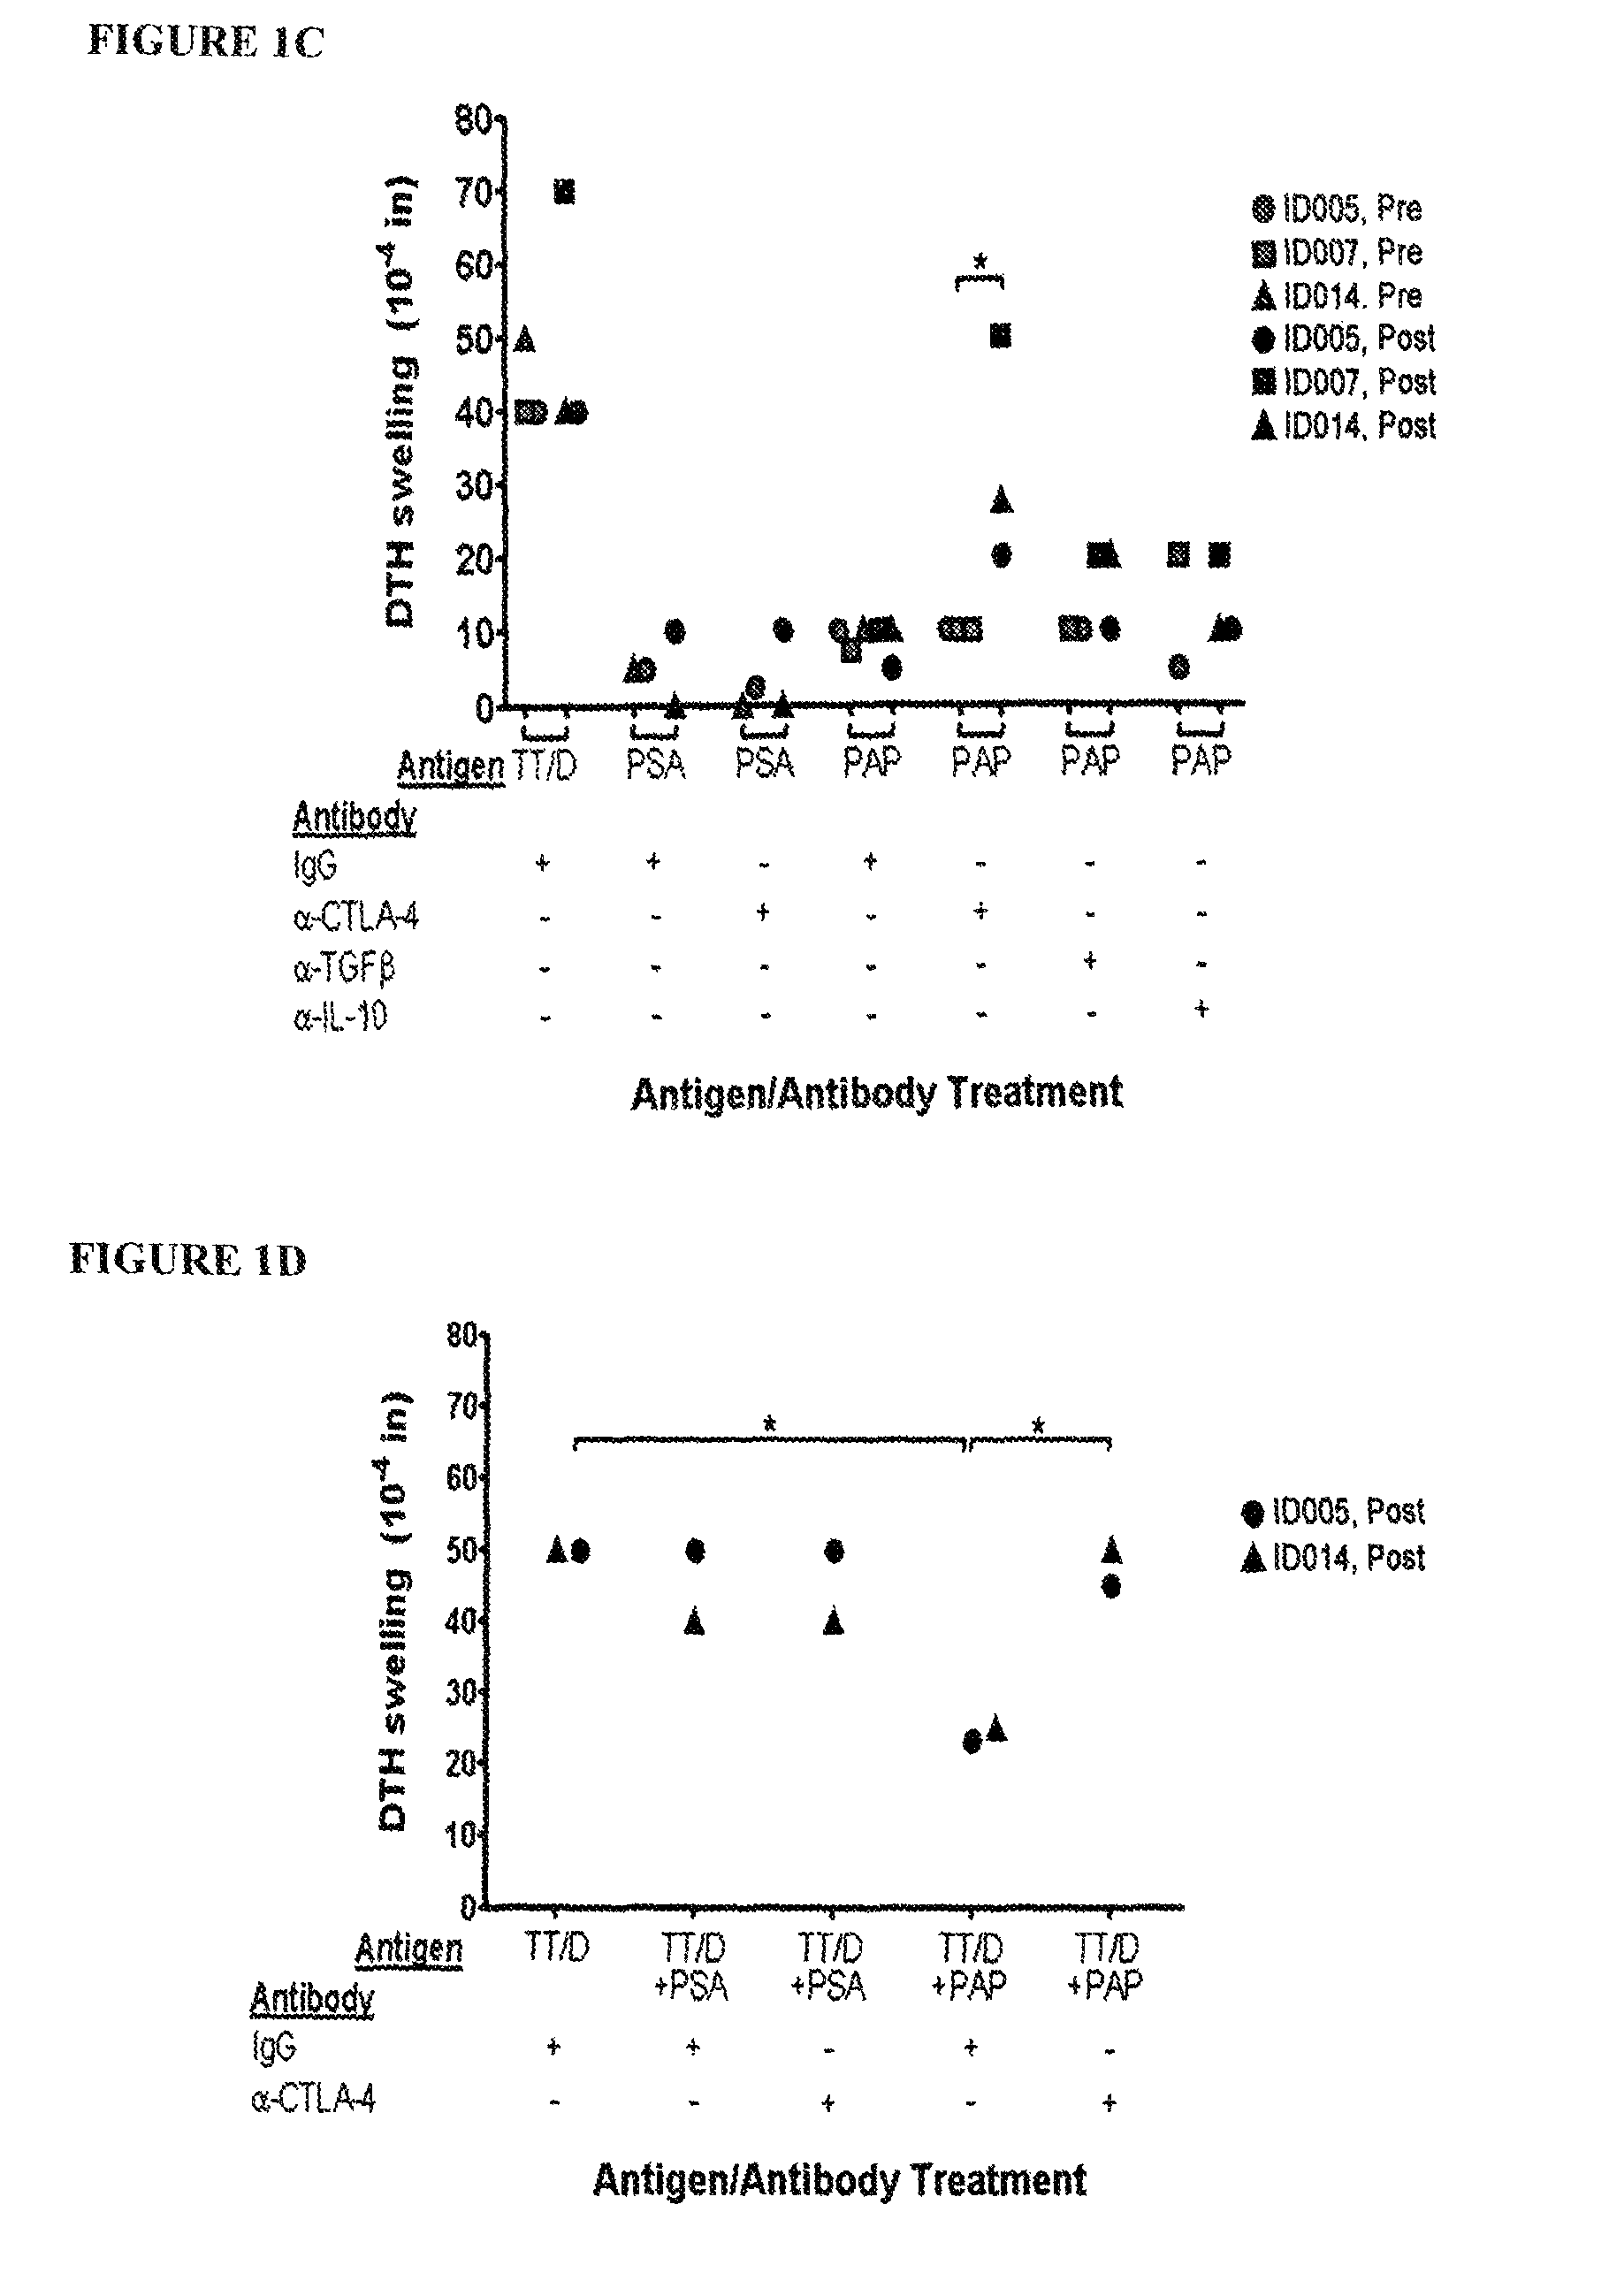 Bystander immune suppression as a predictor for response to a vaccine